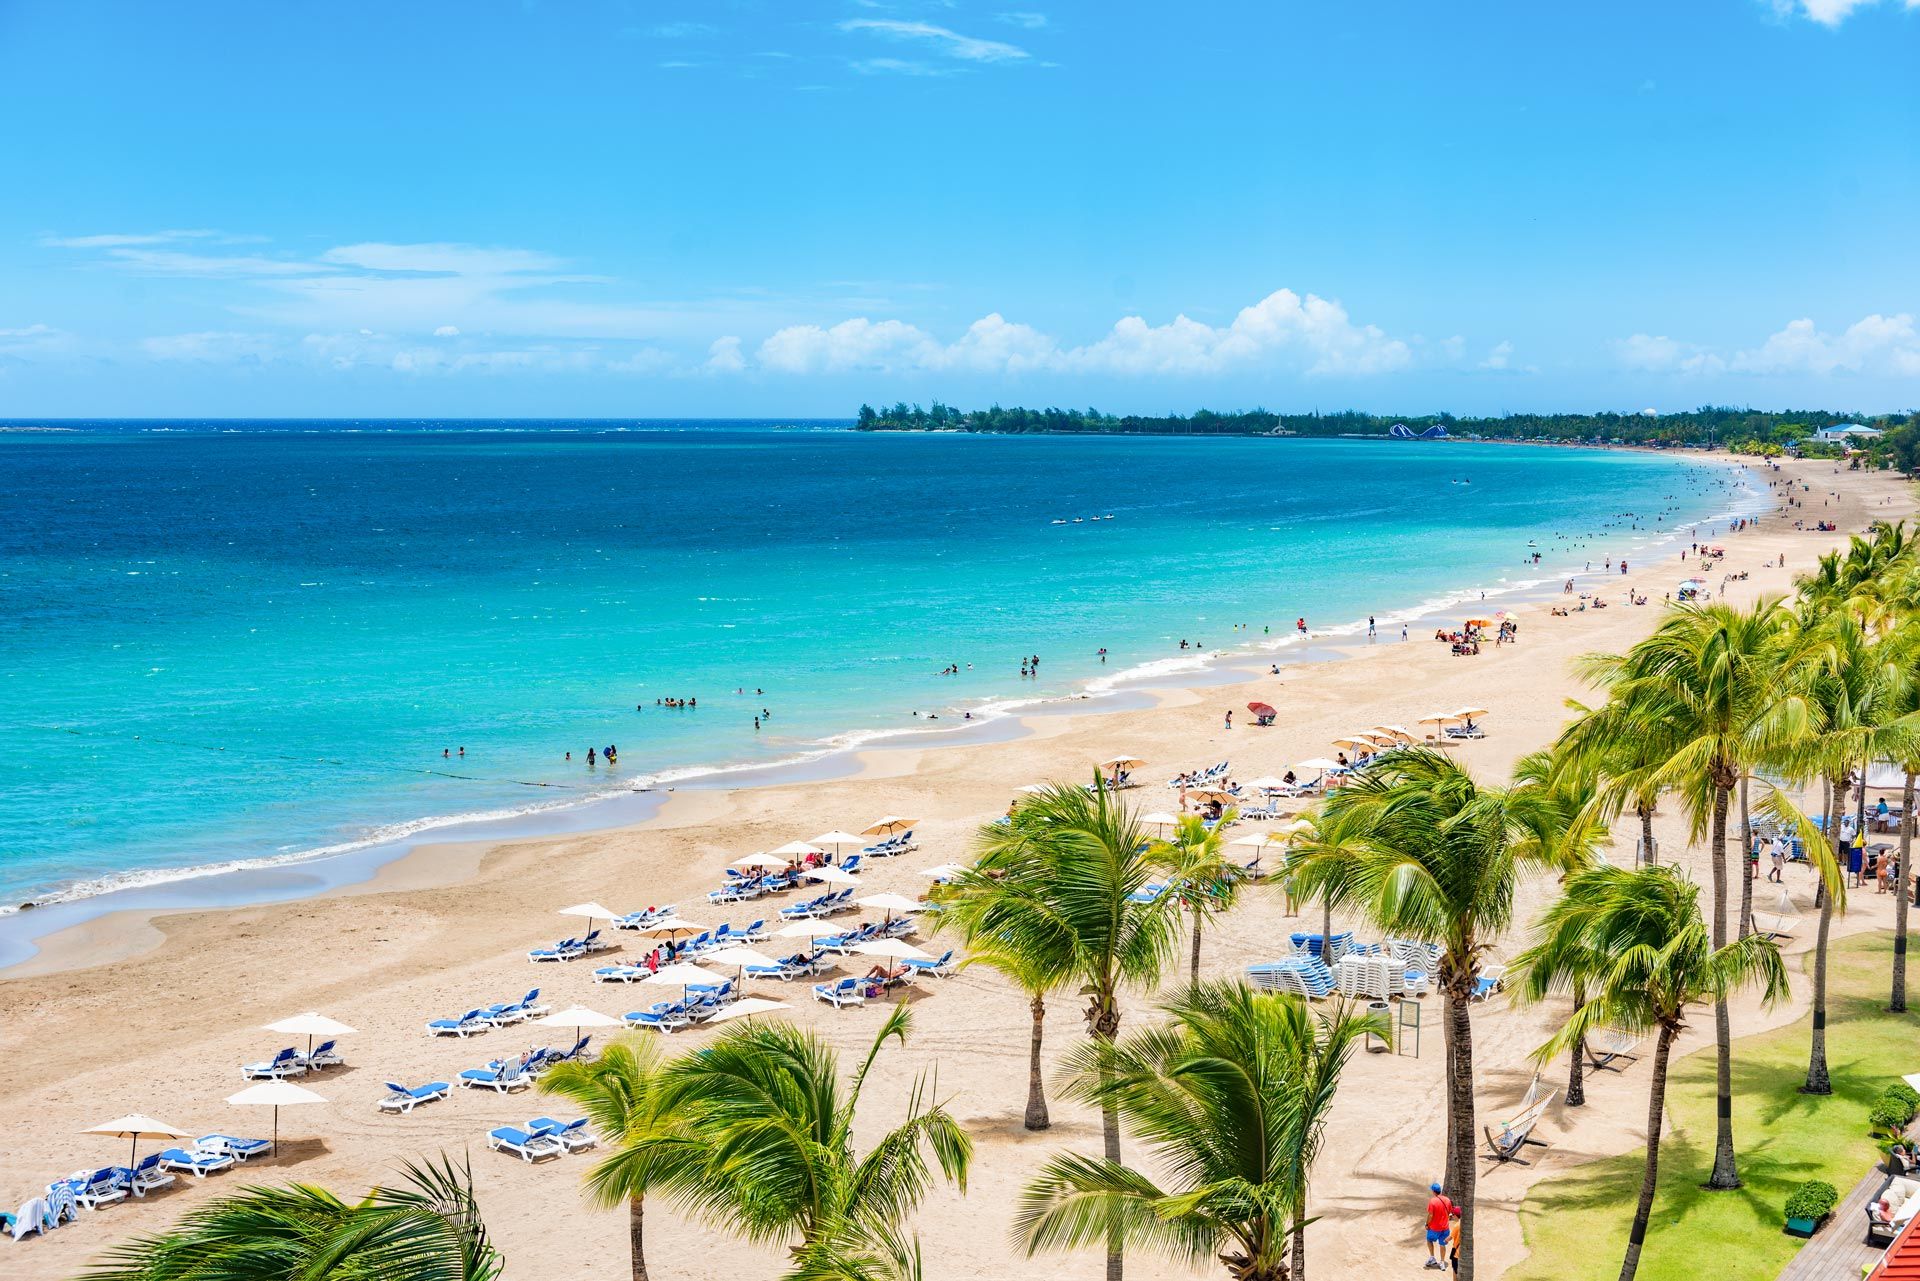 A sky view of a beach in Puerto Rico with palm trees and beach chairs